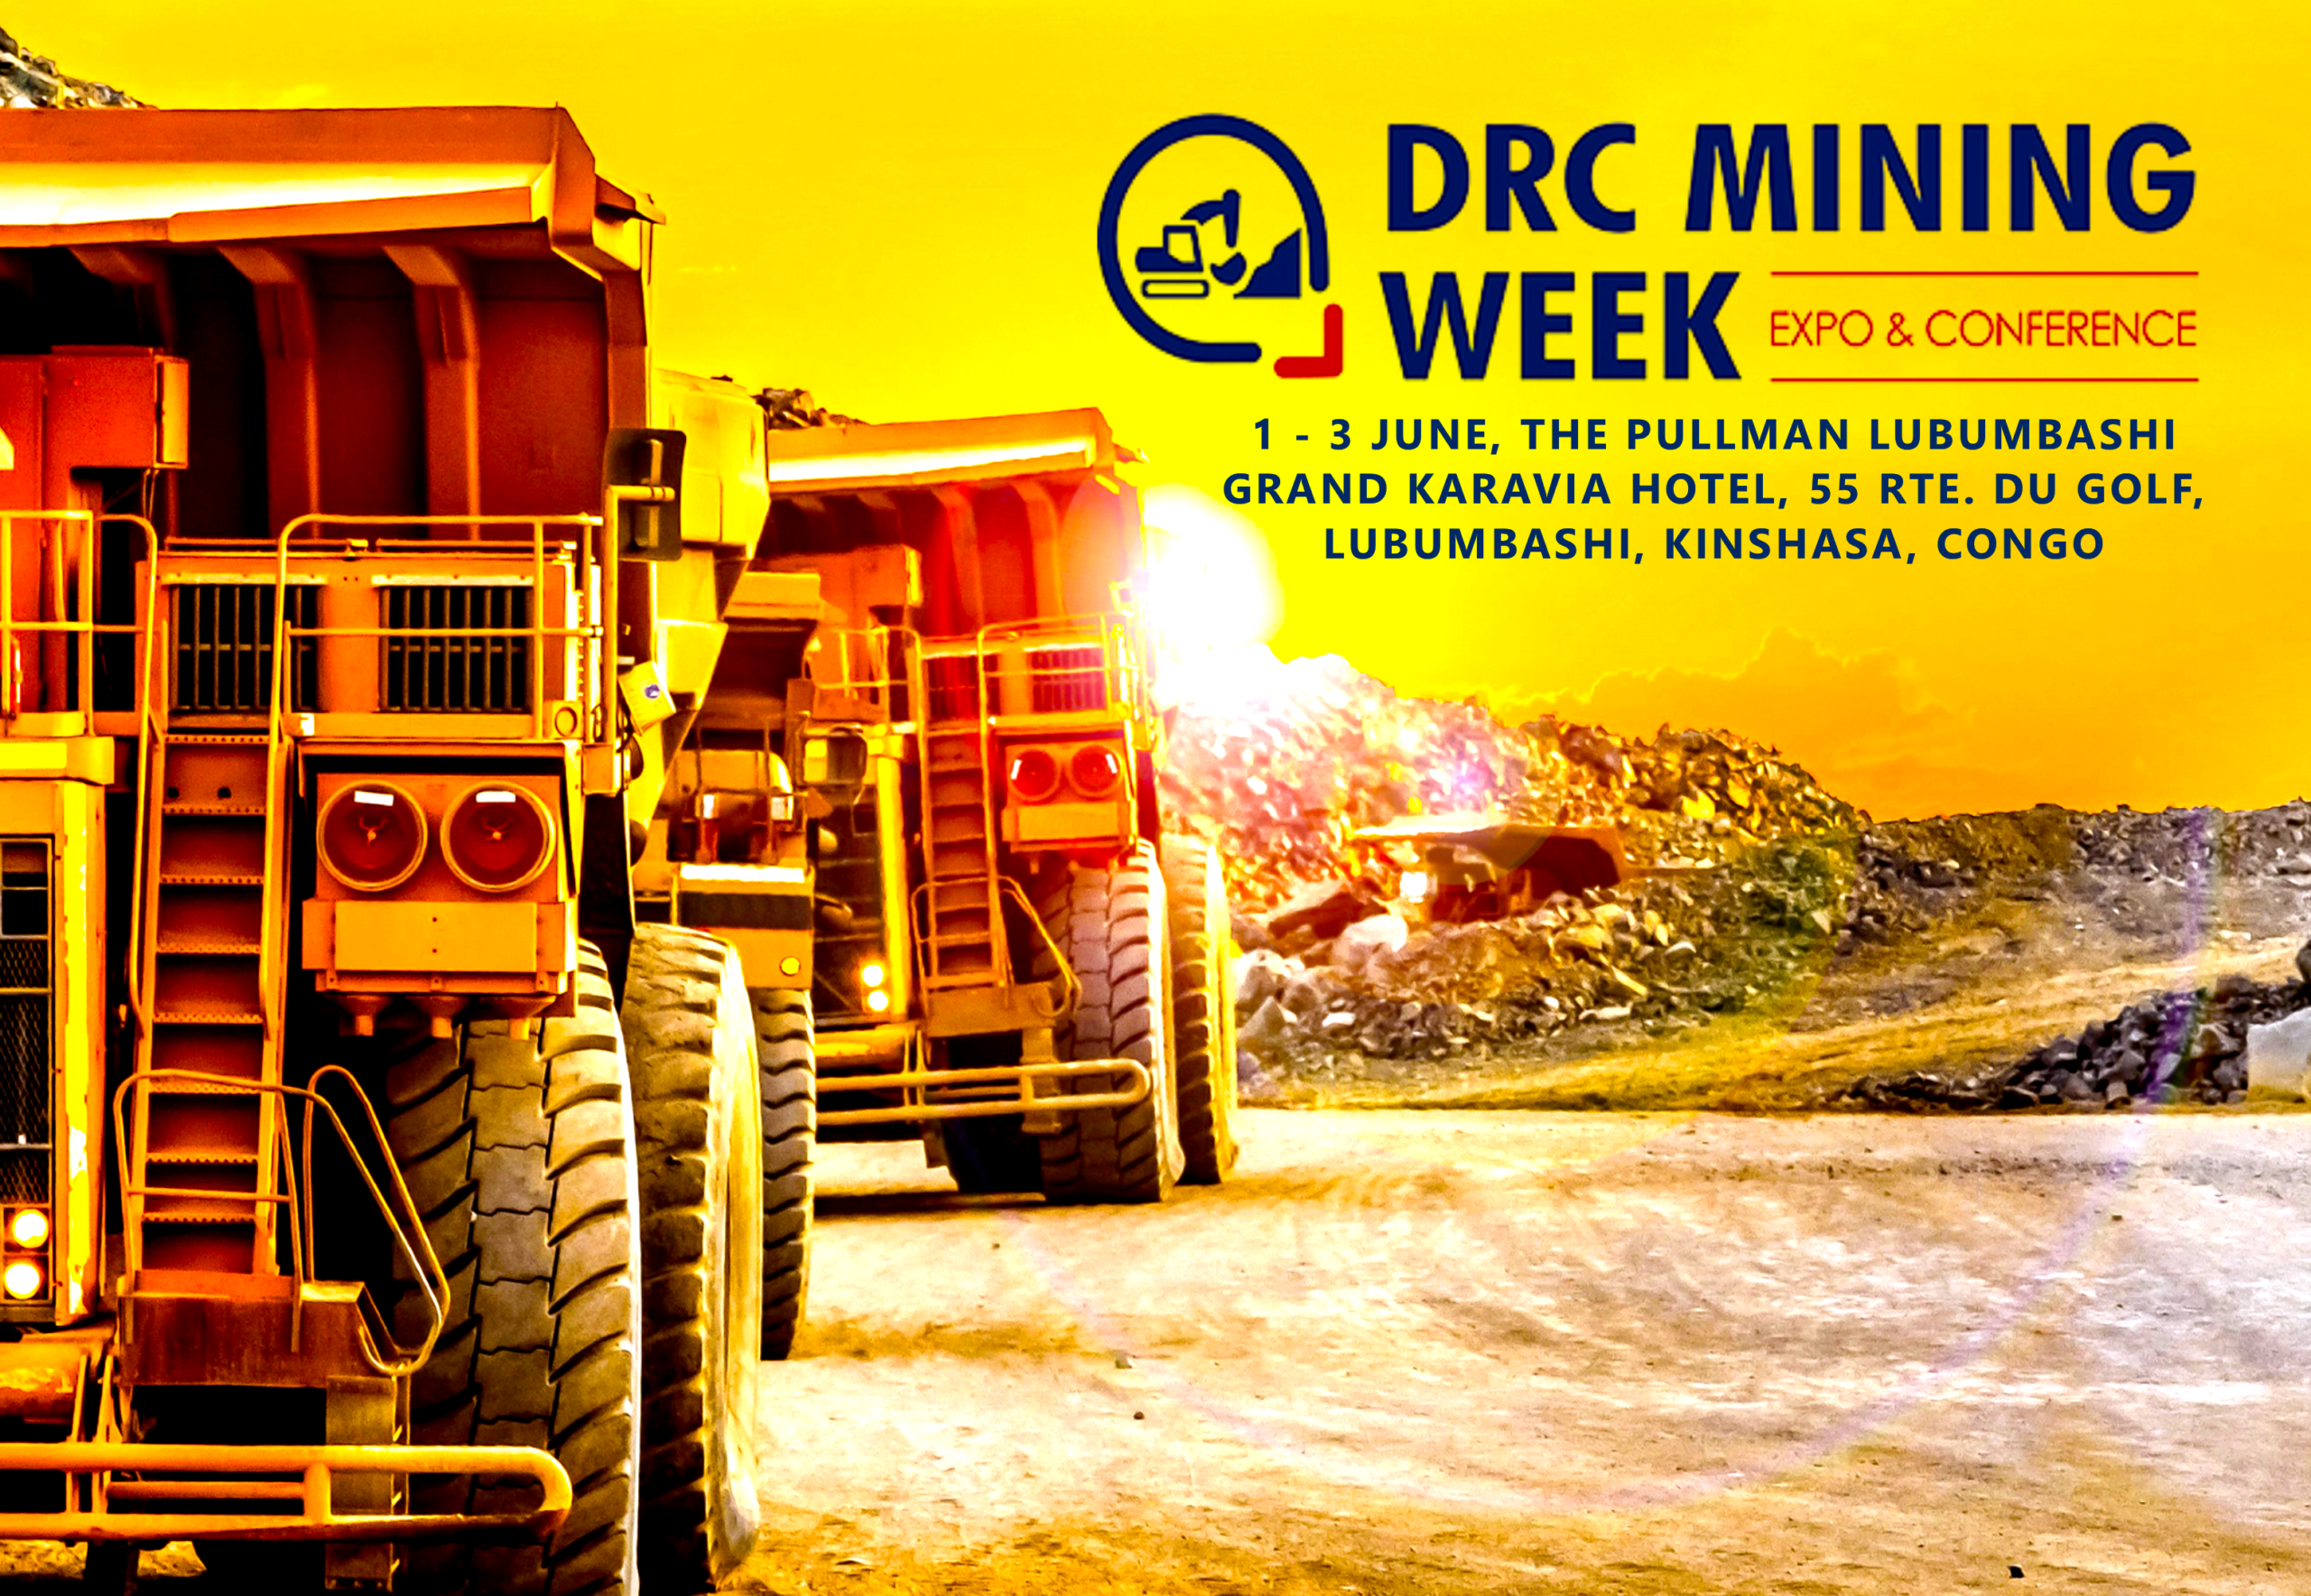 DRC Mining Week Expo & Conference 2022